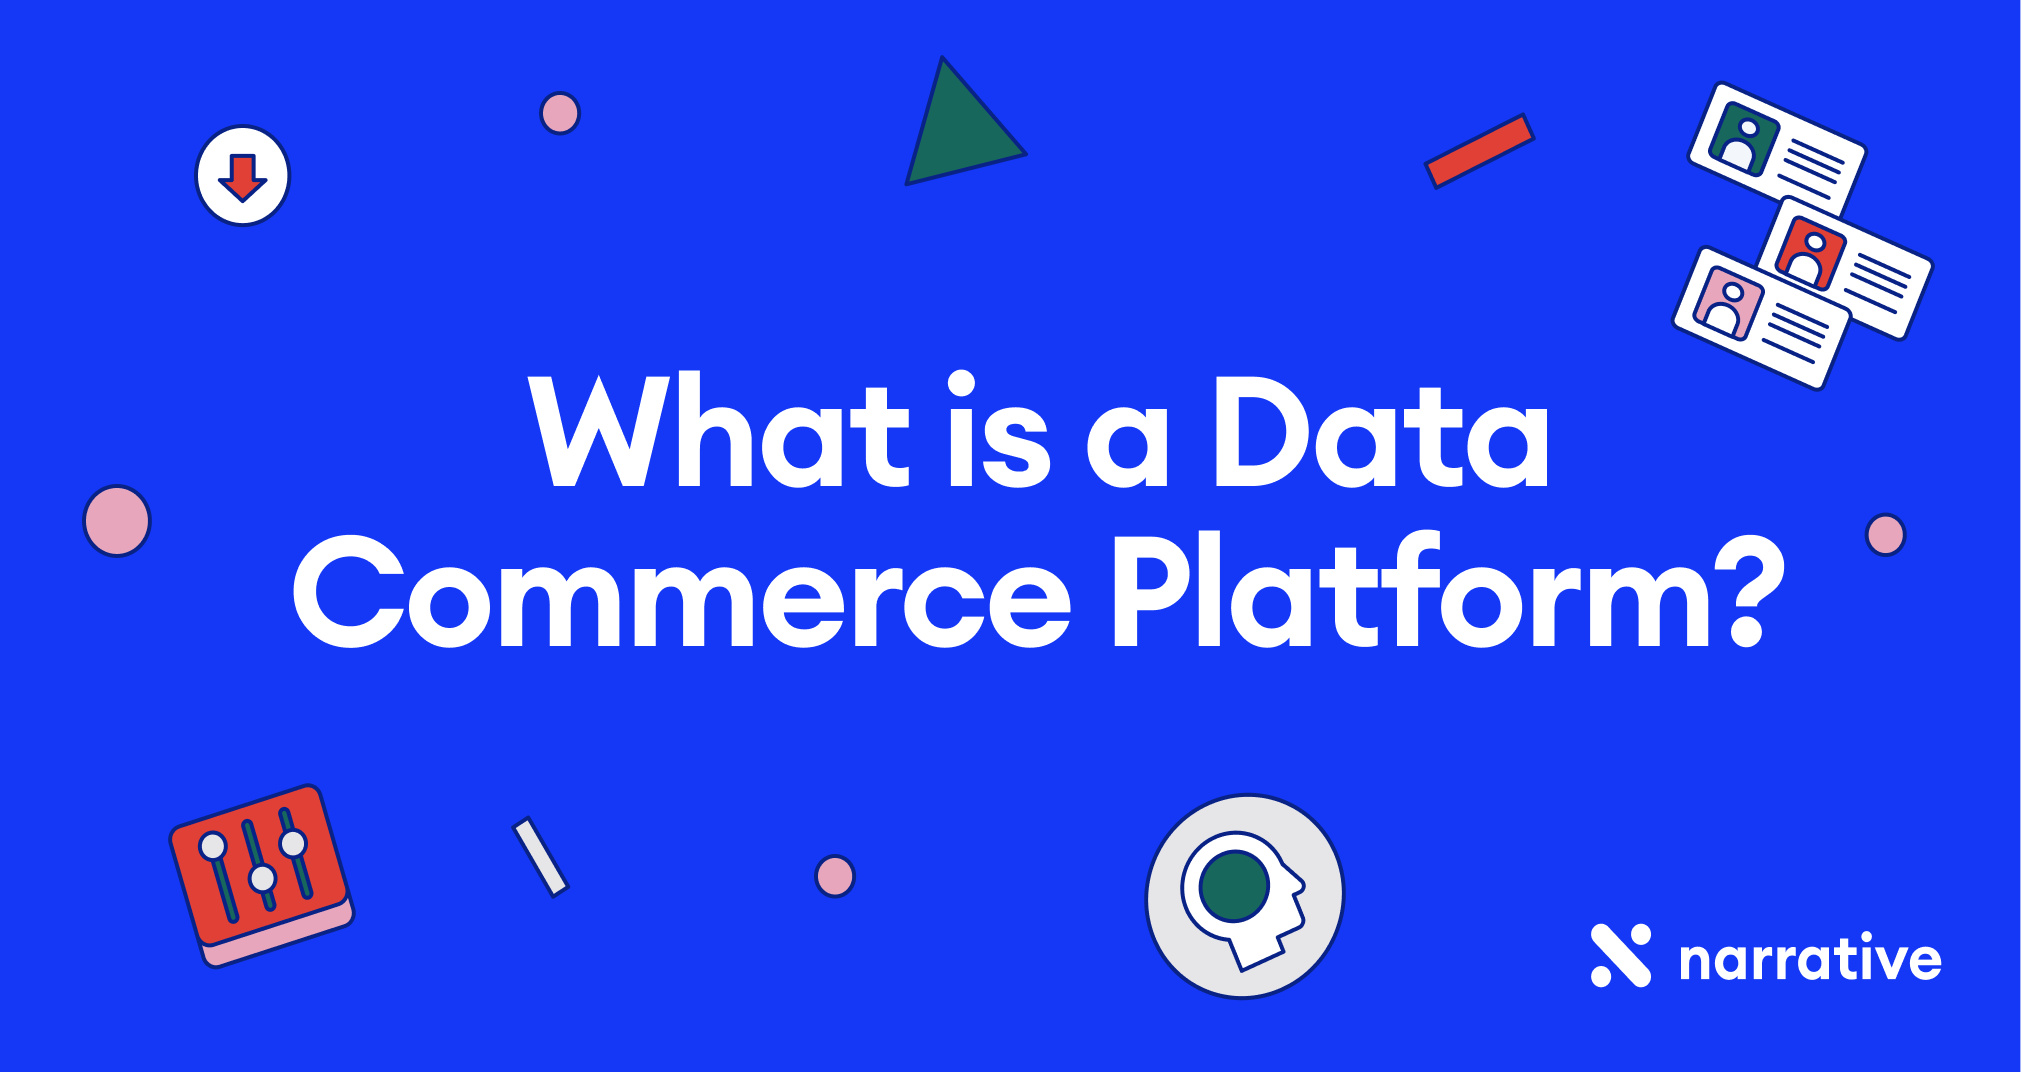 What is a Data Commerce Platform?